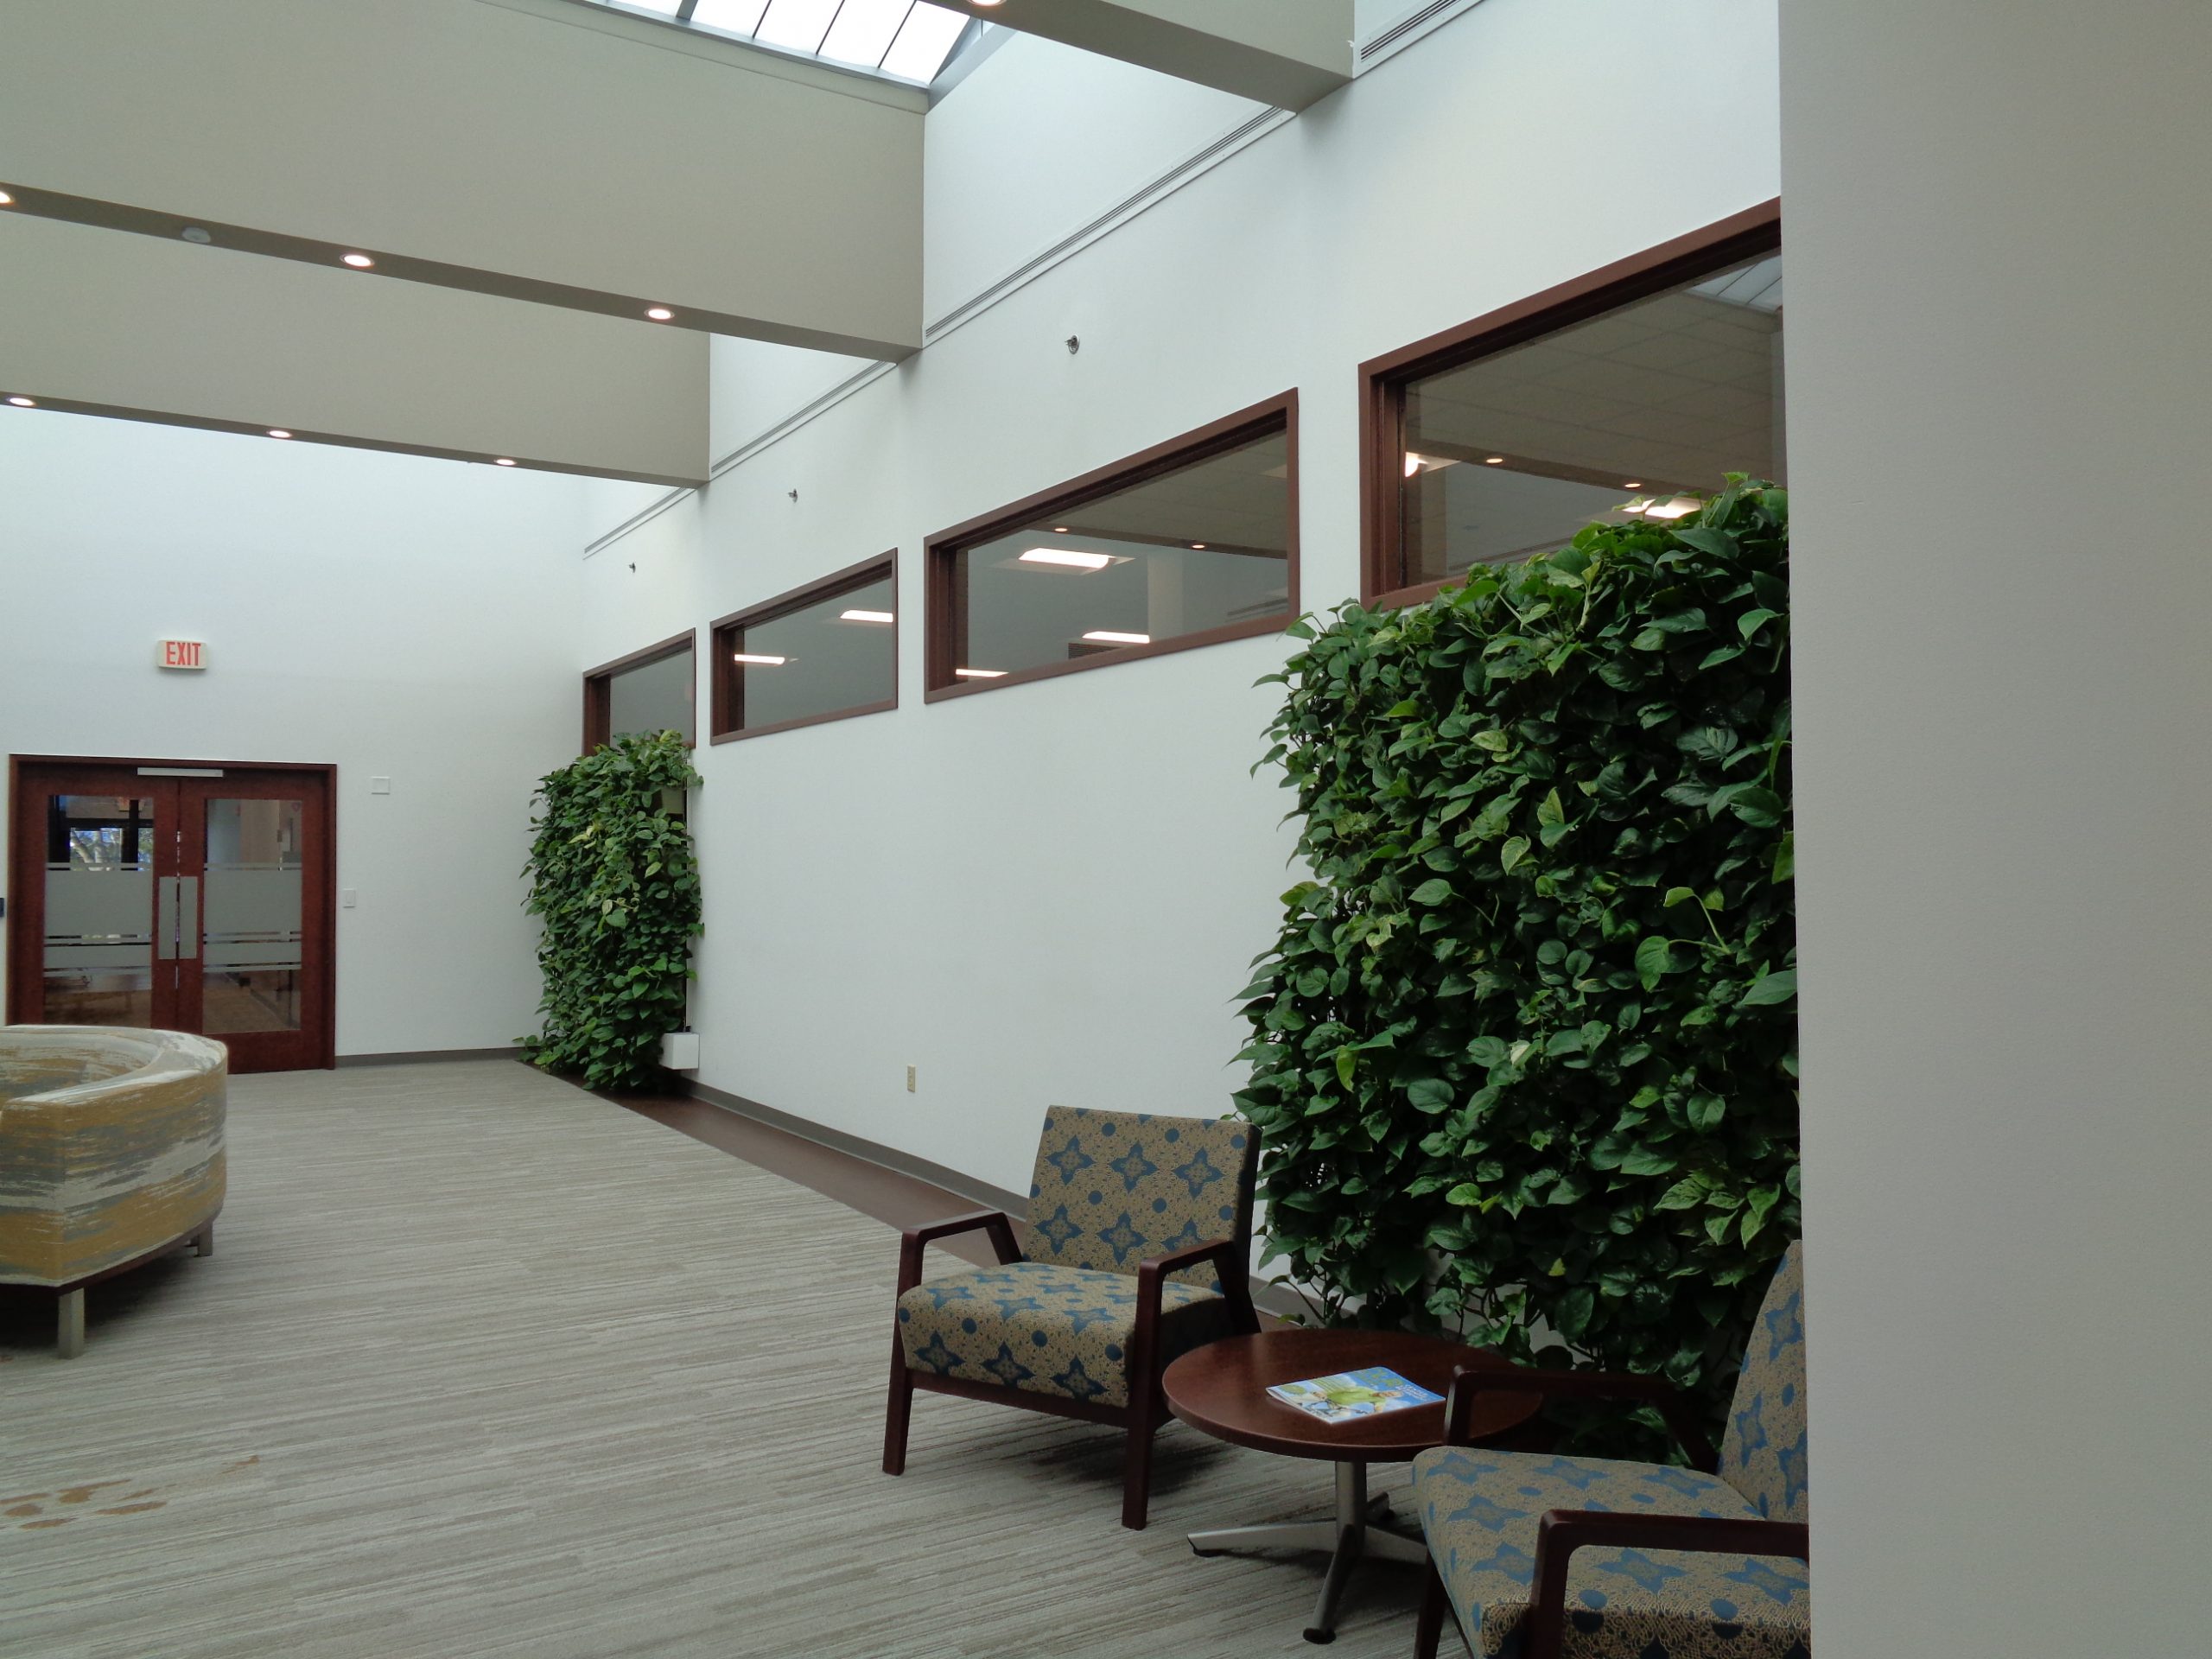 Photo of the Two Living Walls in Northern Illinois Hospice's Lobby